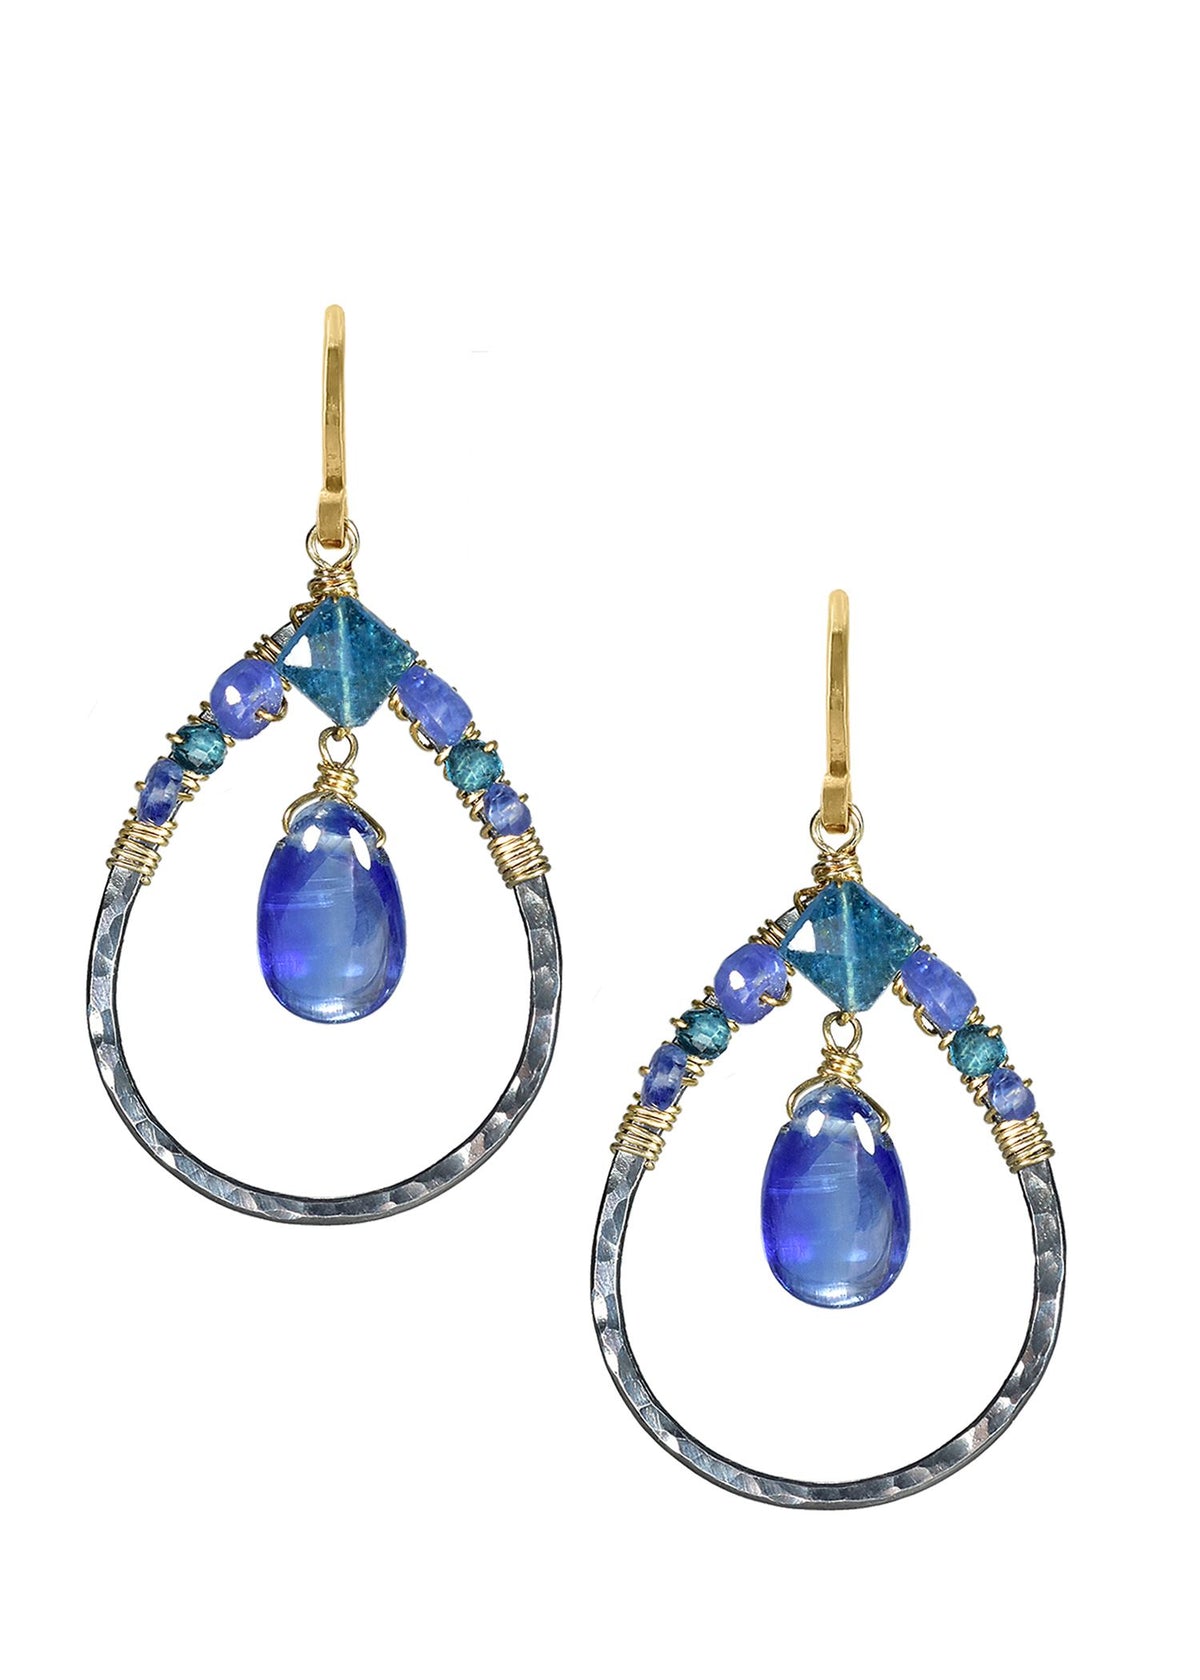 London blue topaz Kyanite Blue quartz 14k gold fill Blackened sterling silver Mixed metal Earrings measure 1-3/8&quot; in length (including the ear wires) and 11/16&quot; in width Handmade in our Los Angeles studio